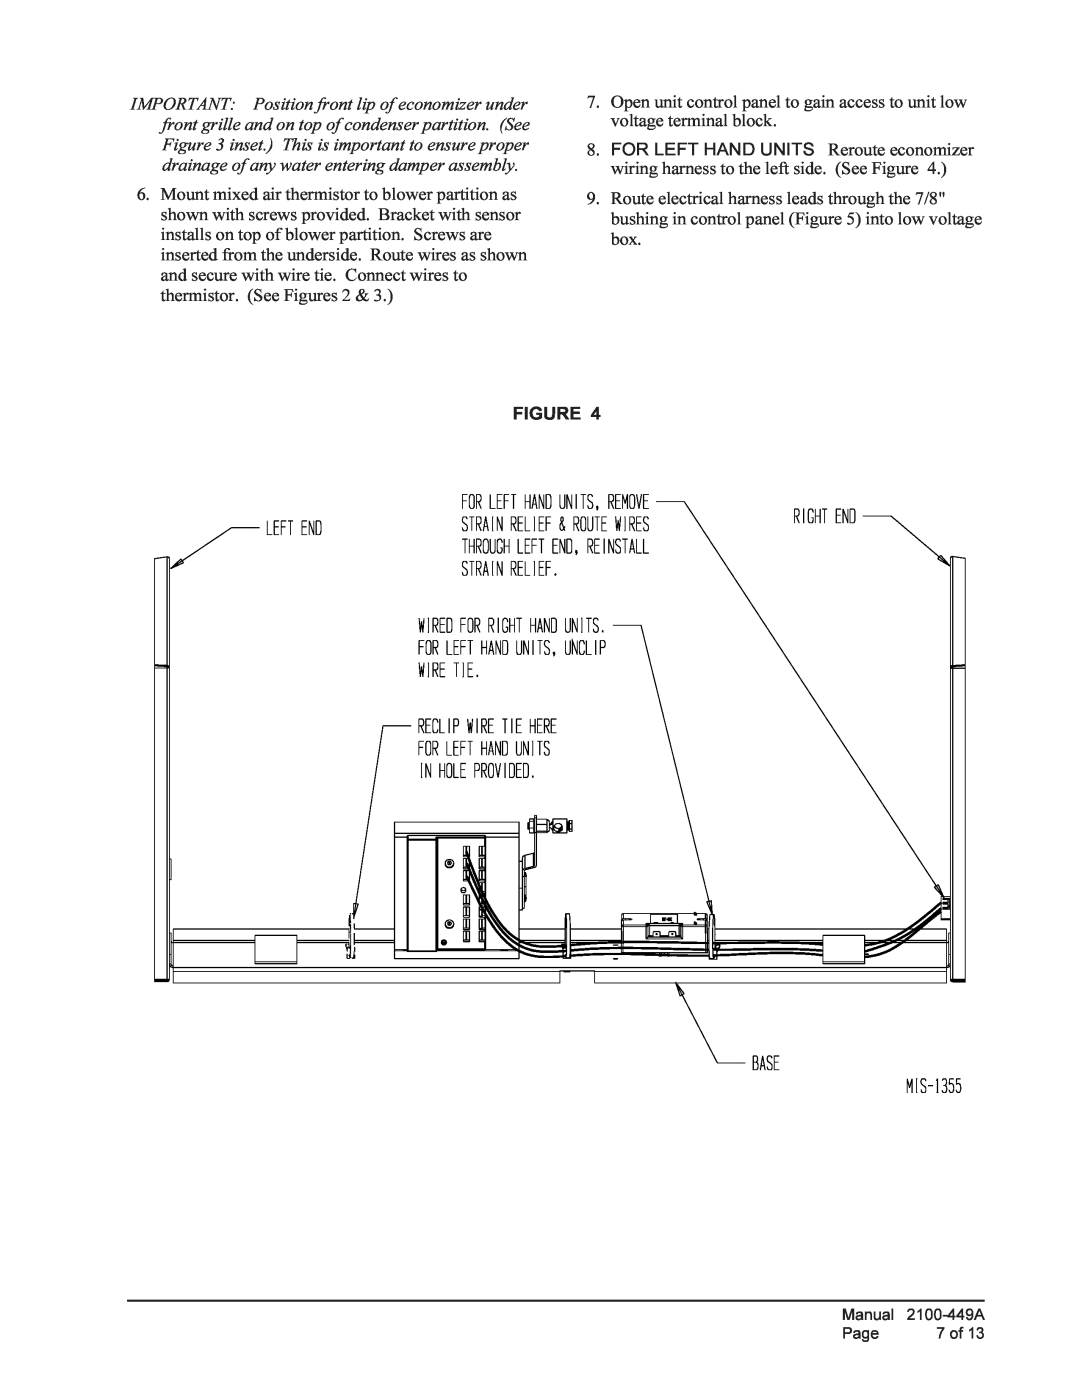 Bard EIFM-3C installation instructions Manual, Page, 7 of 